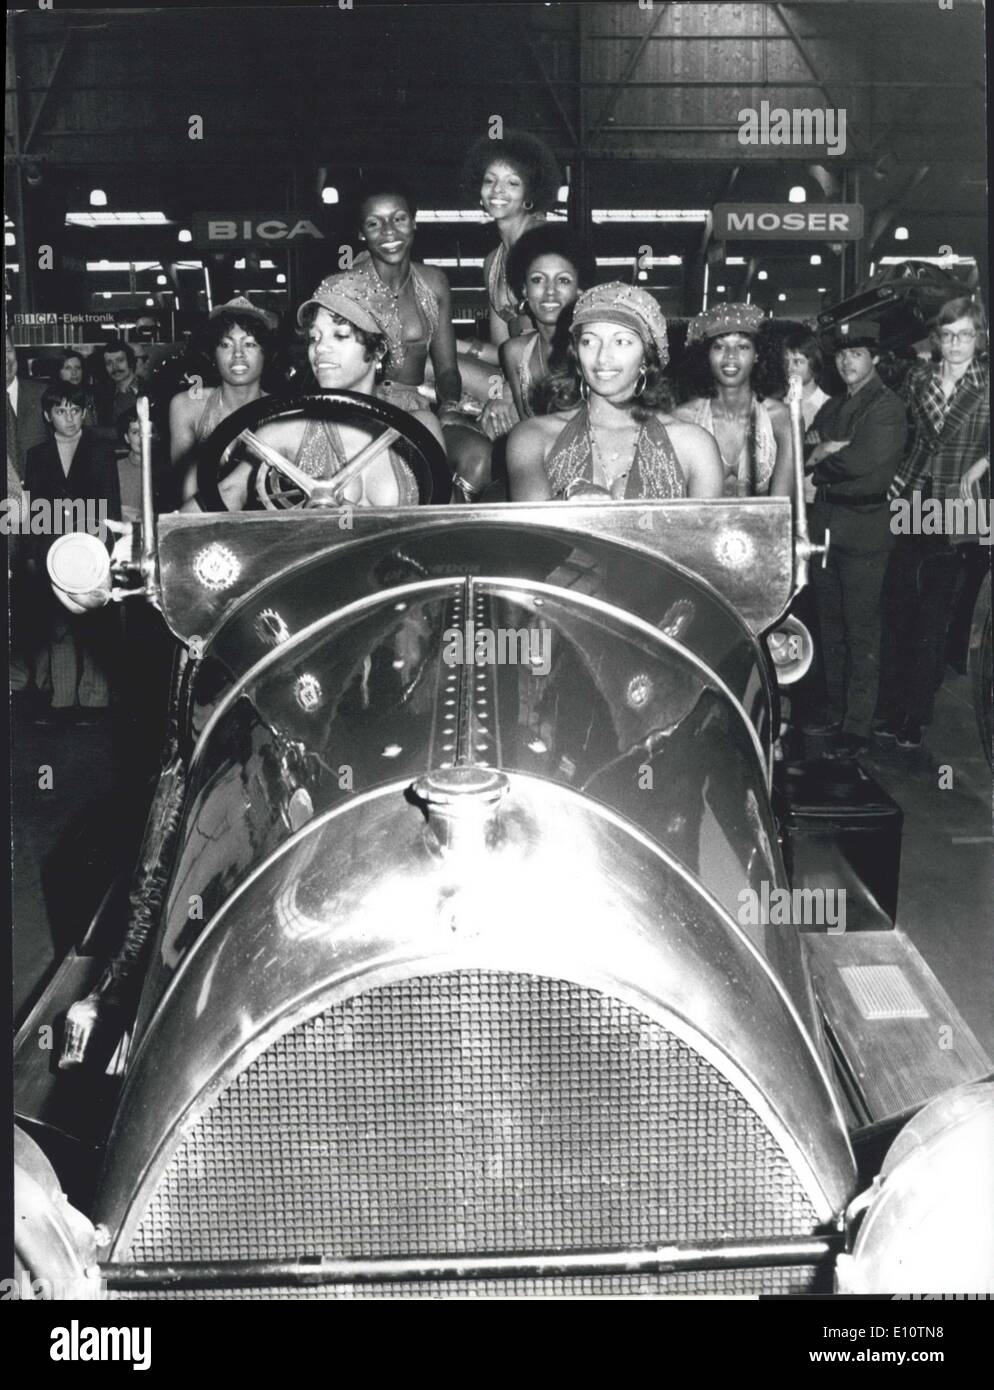 Mar. 21, 1974 - ''Love Machine'' at the Geneva Motor Show. Men do not live of automobiles alone - not event at the International Motor Show in Geneva, where at the stand of the old timers this wonderfully attractive and charming quintet of the ''Love Machine'' had its parade. Stock Photo